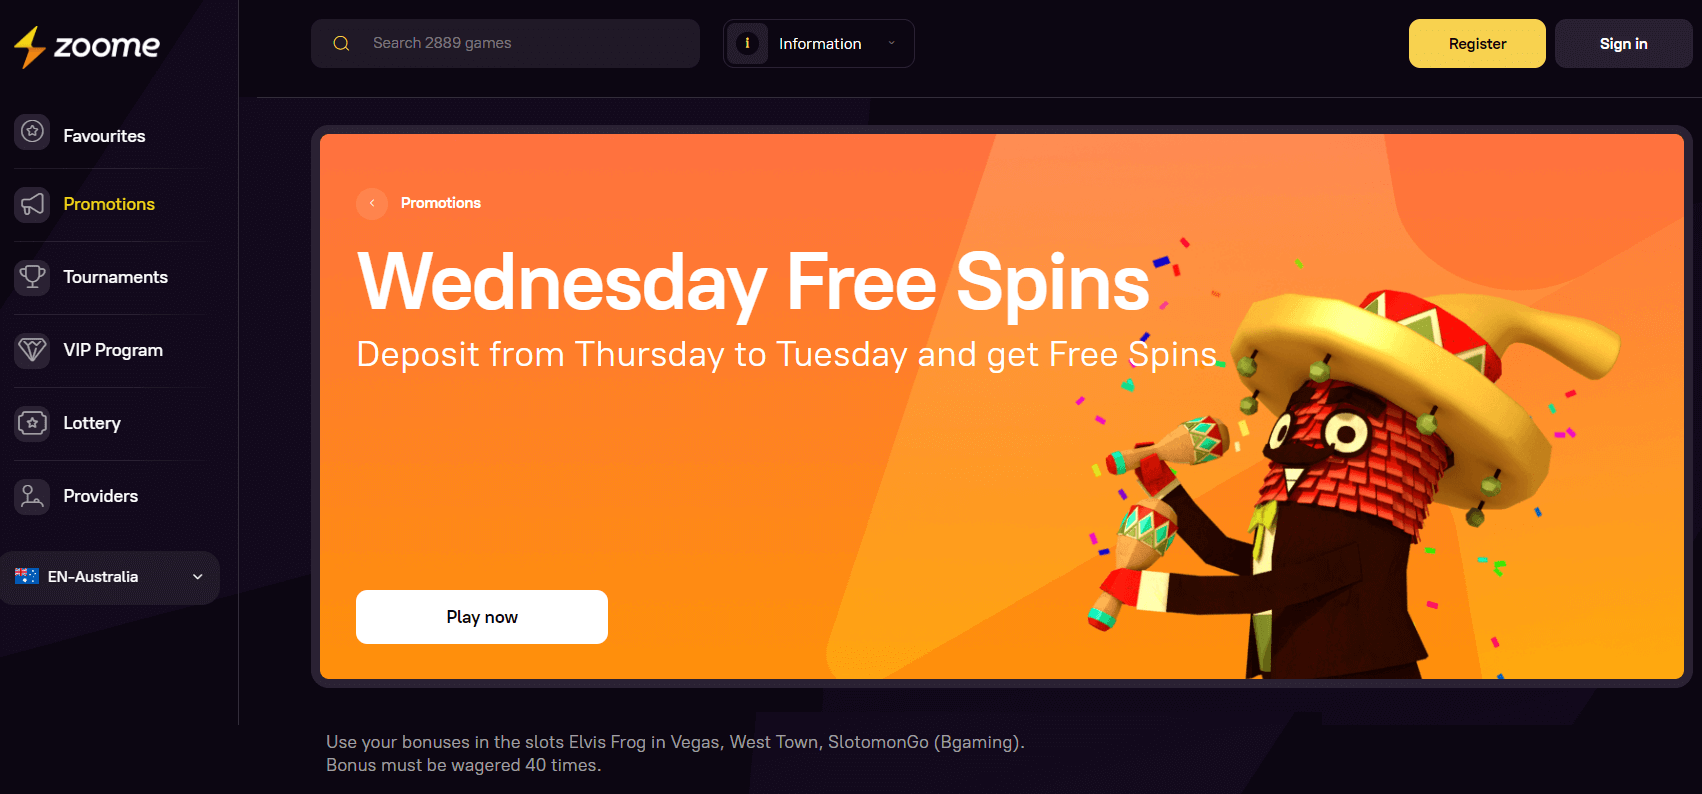 Wednesday Free spins